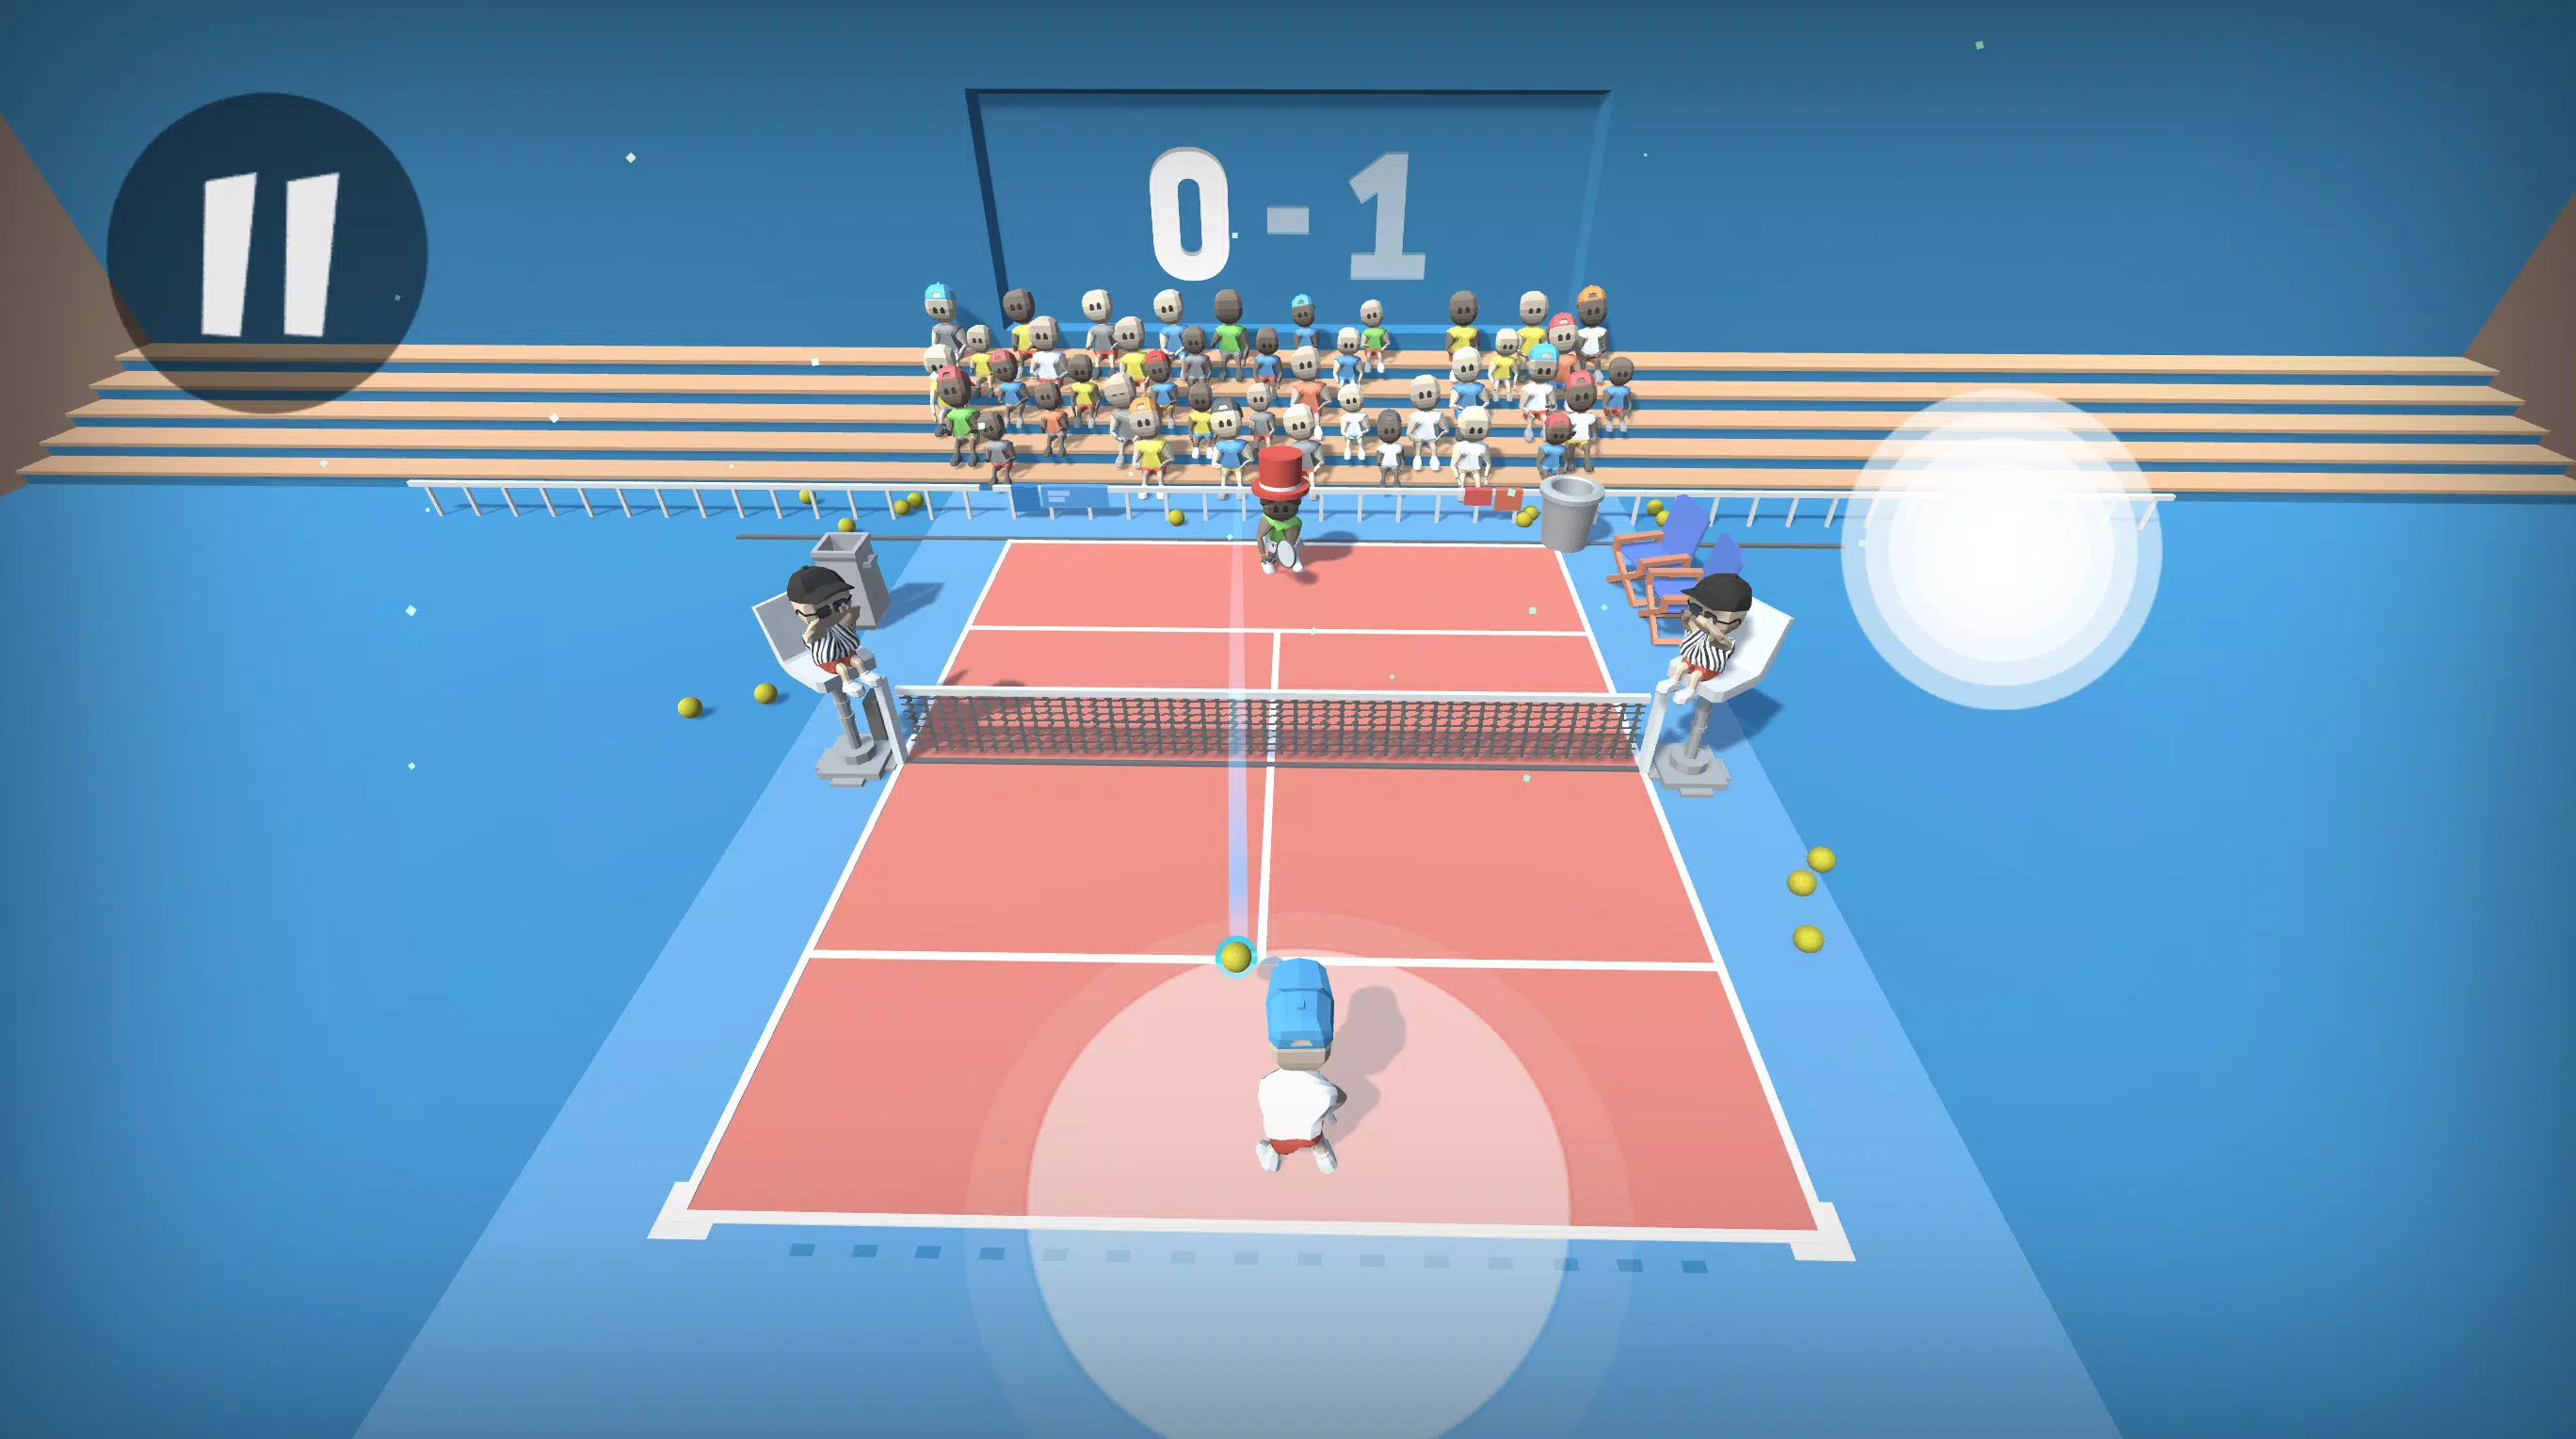 3D Tennis APK for Android Download